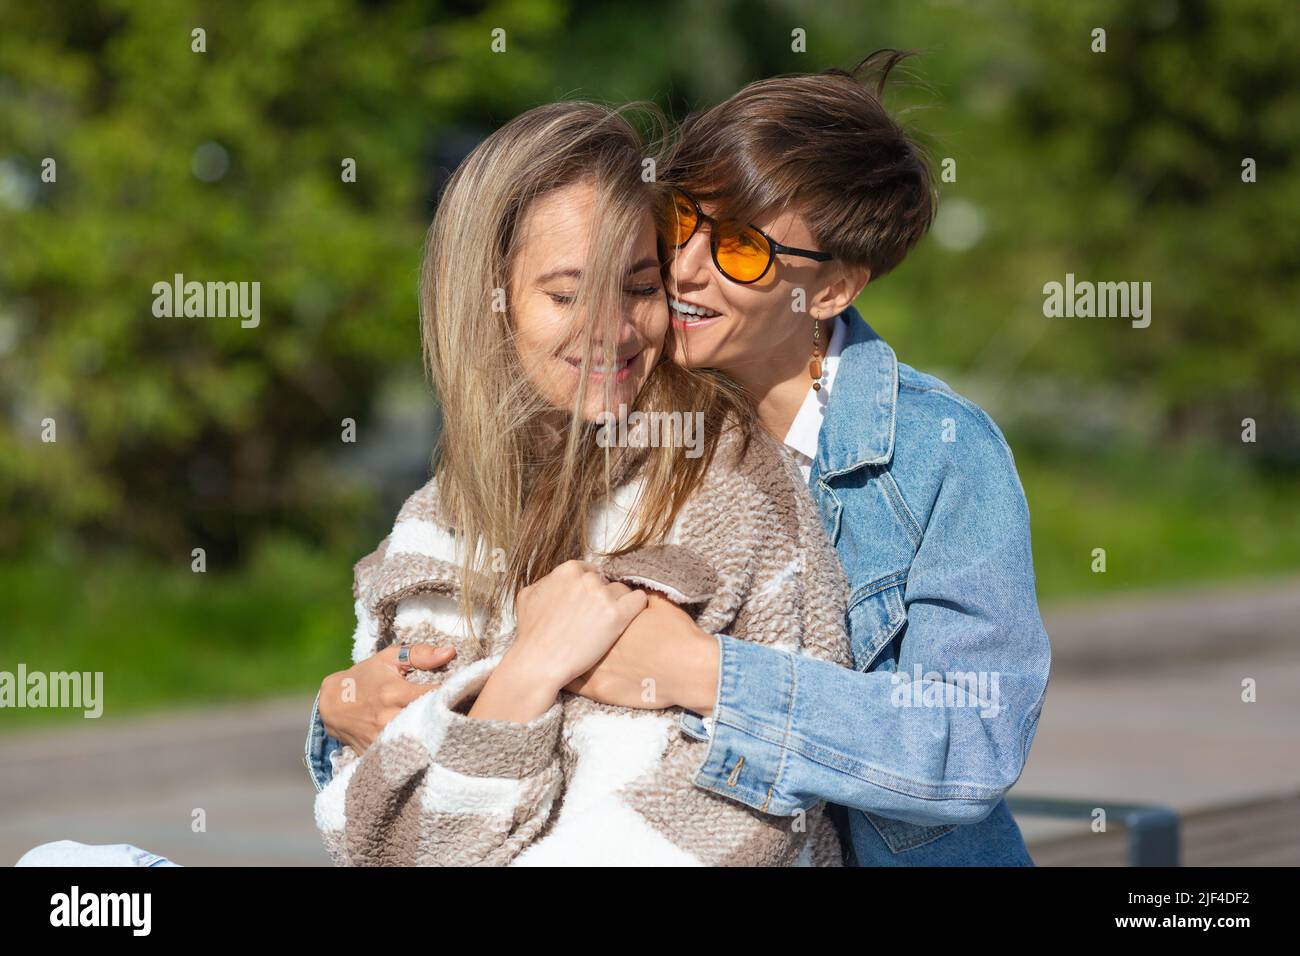 Love and relationships concept. Lesbian couple enjoy each other. Beautiful romantic moment between two female lovers. Stock Photo